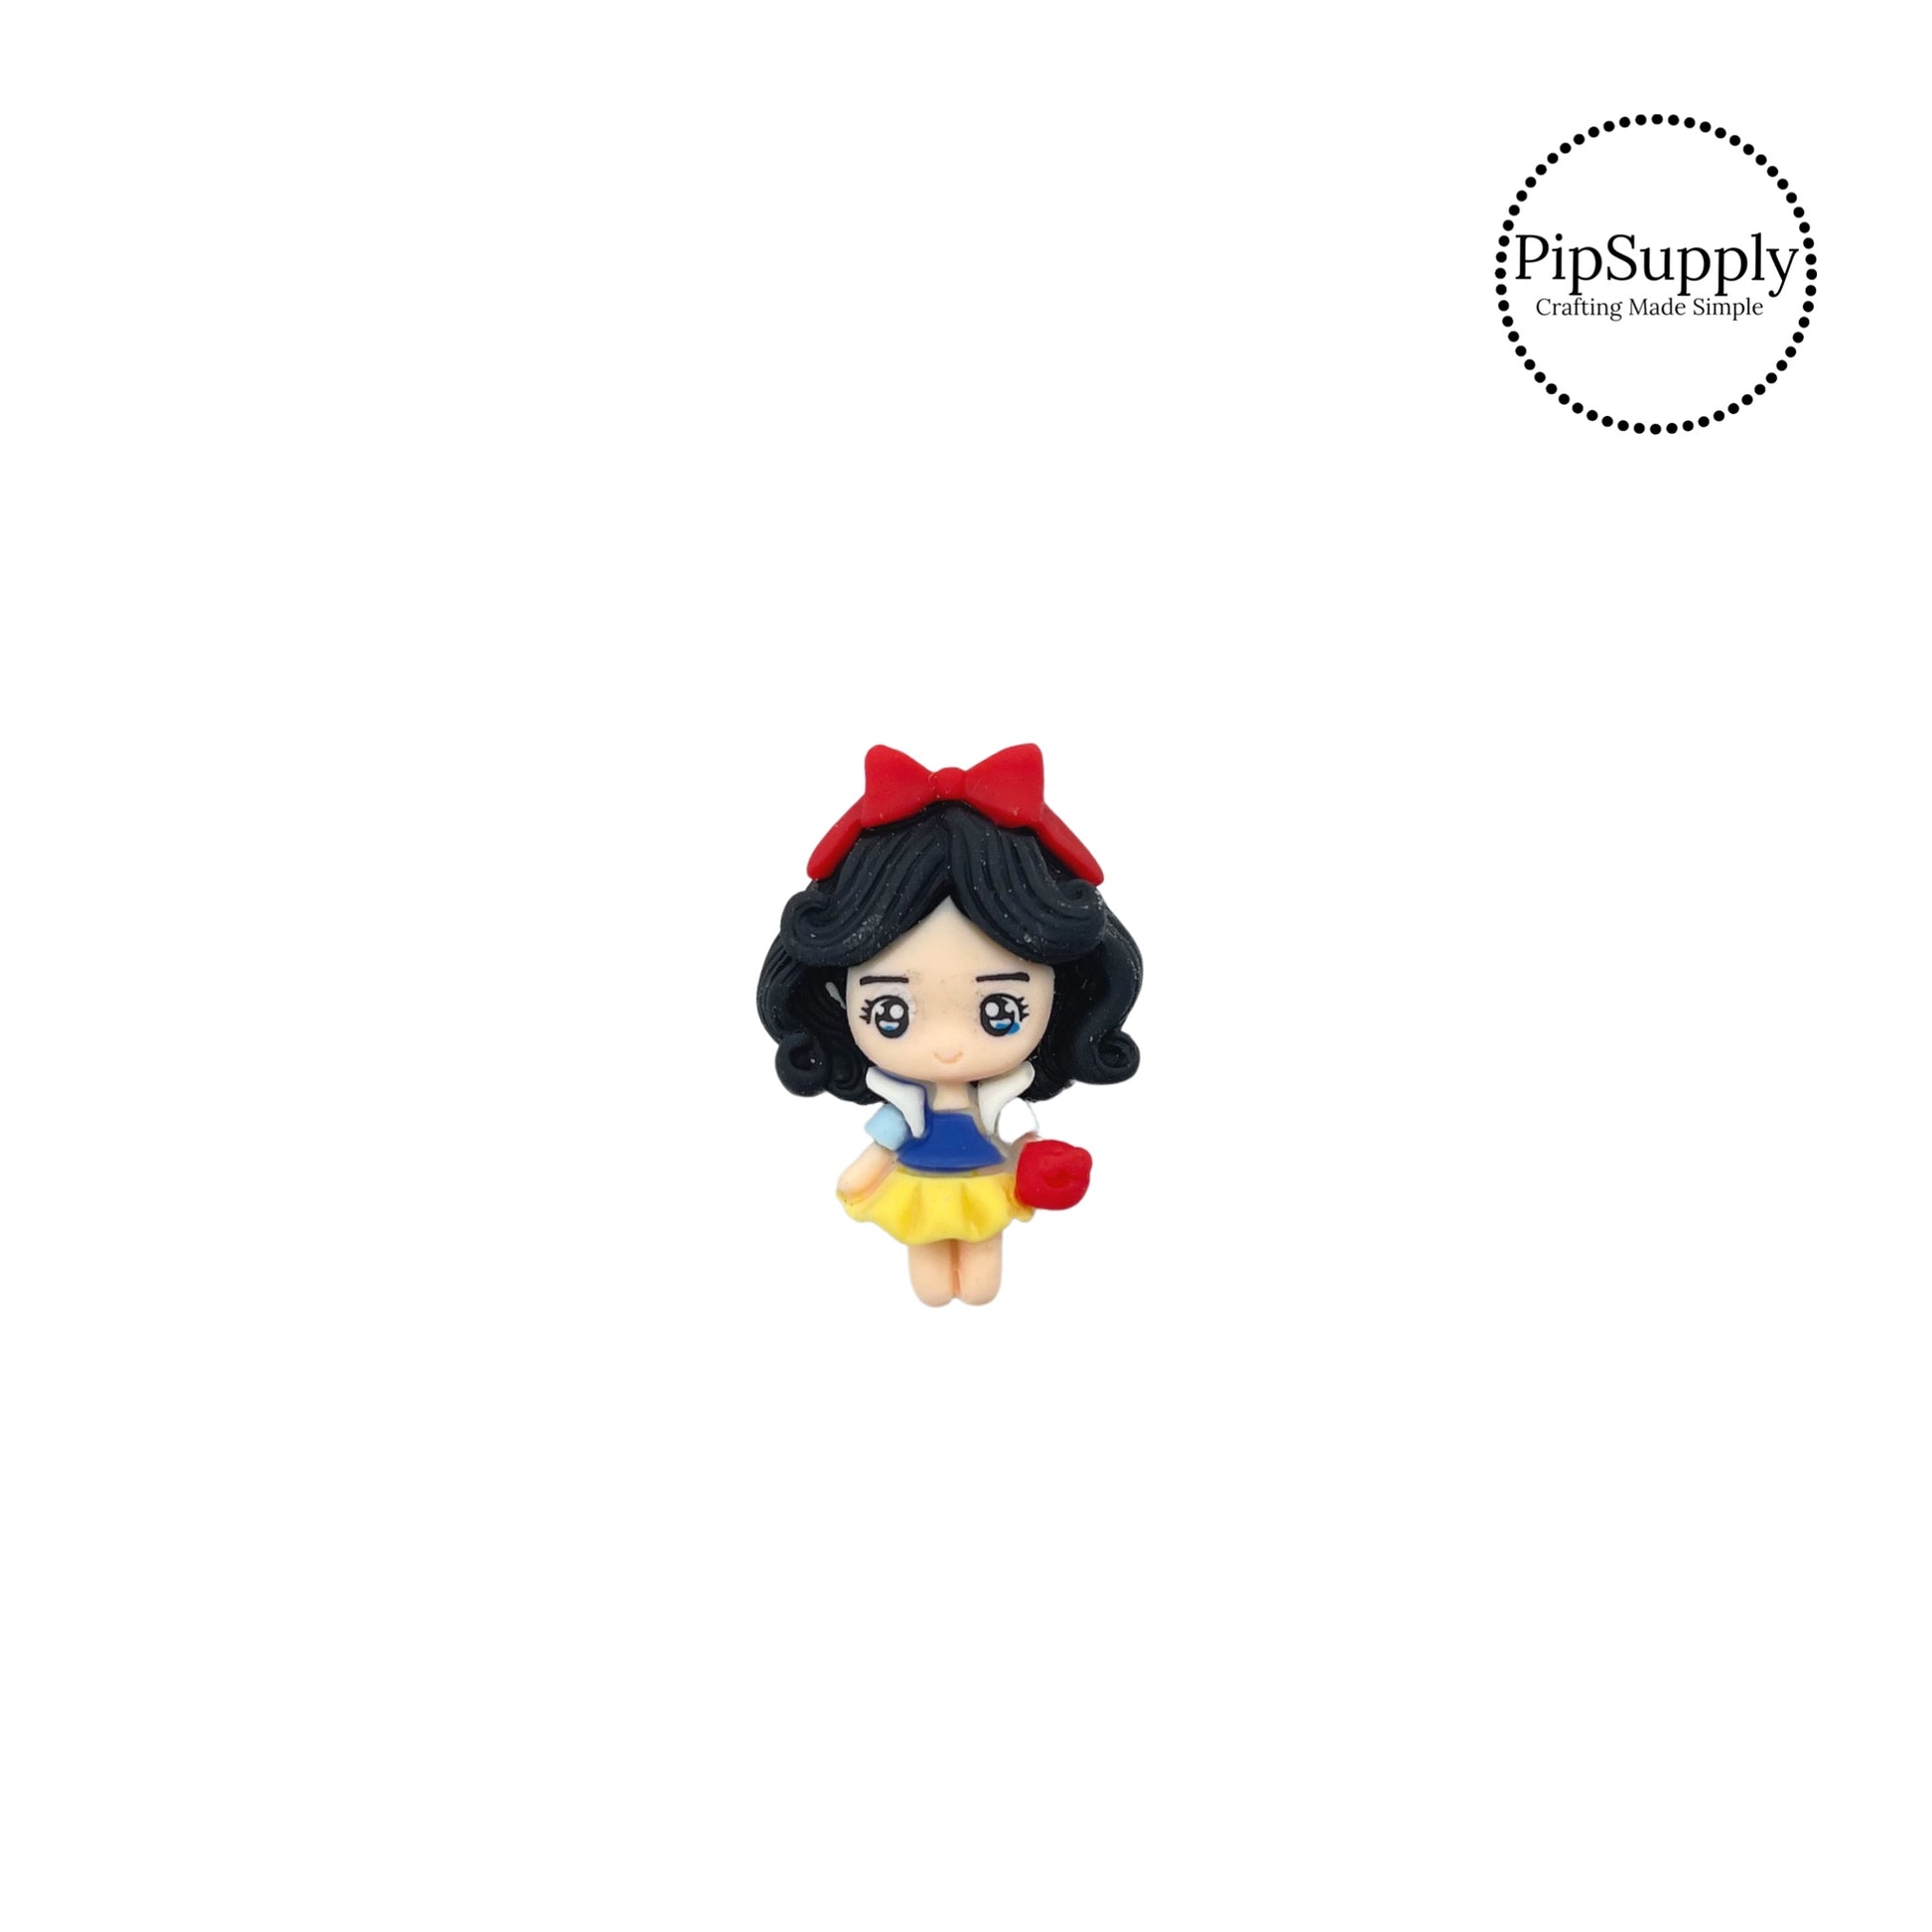 Black hair with red bow, blue and yellow dress, with red flower princess flat back resin embellishment